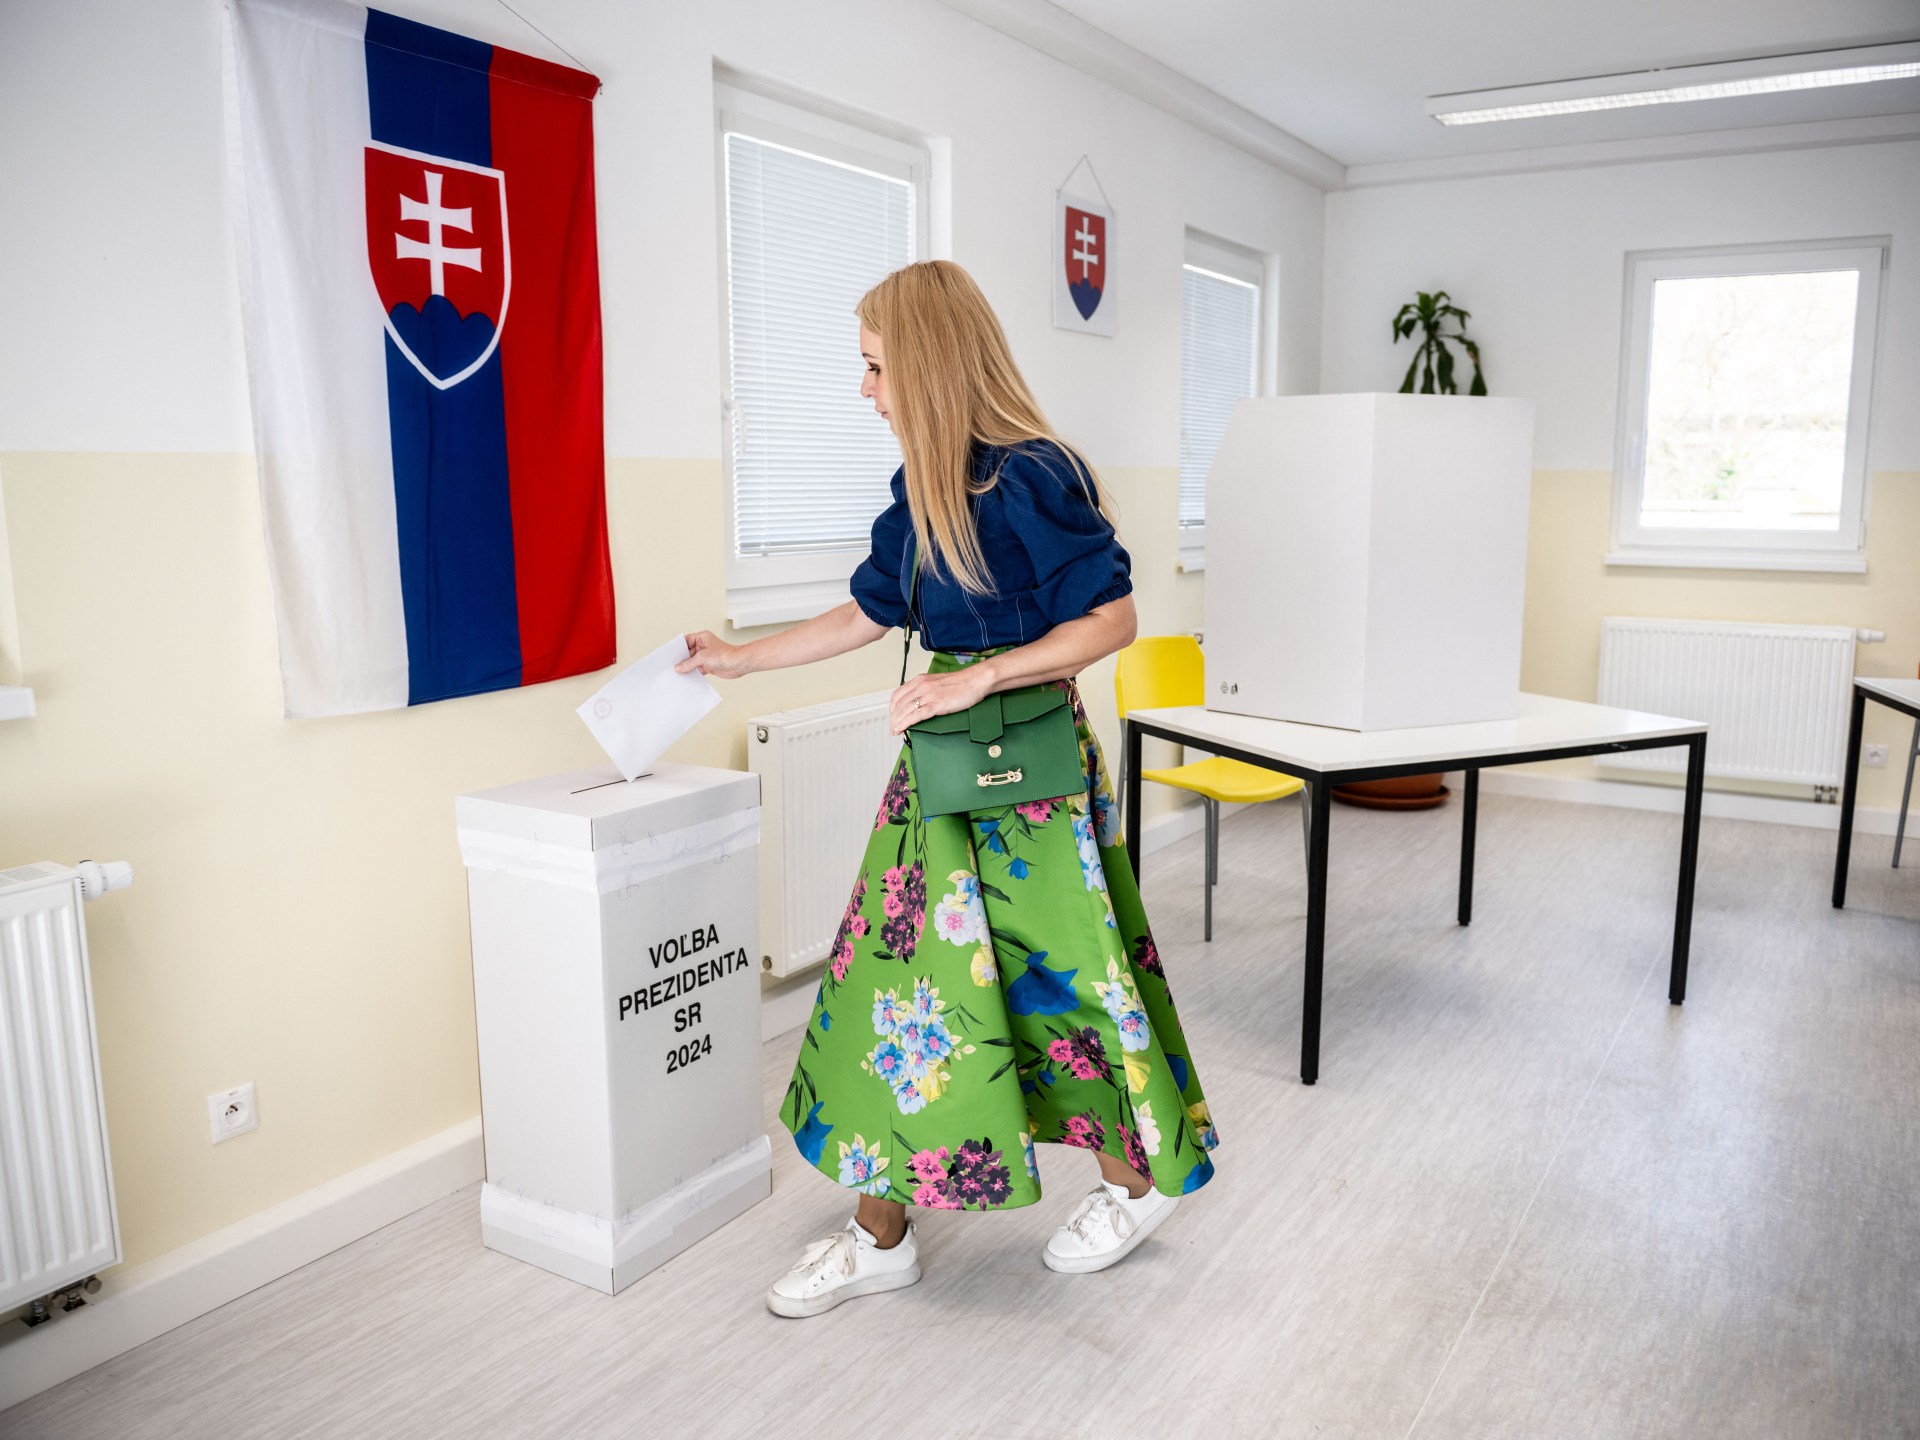 Slovakia elects new president amid divisions over Ukraine war | Elections News